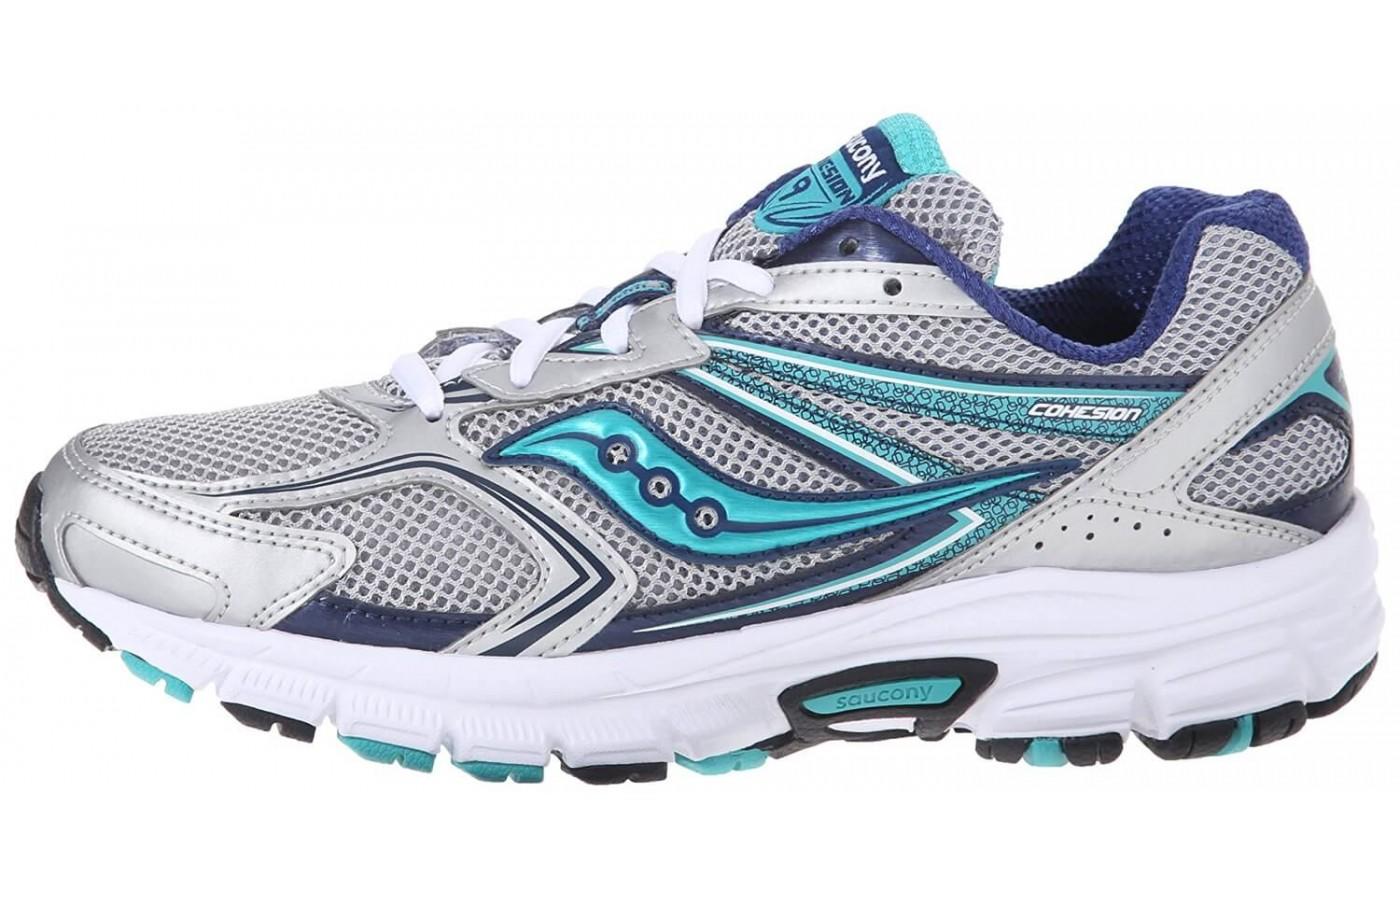 Despite its high heel drop, the Saucony Cohesion 9 is highly flexible.